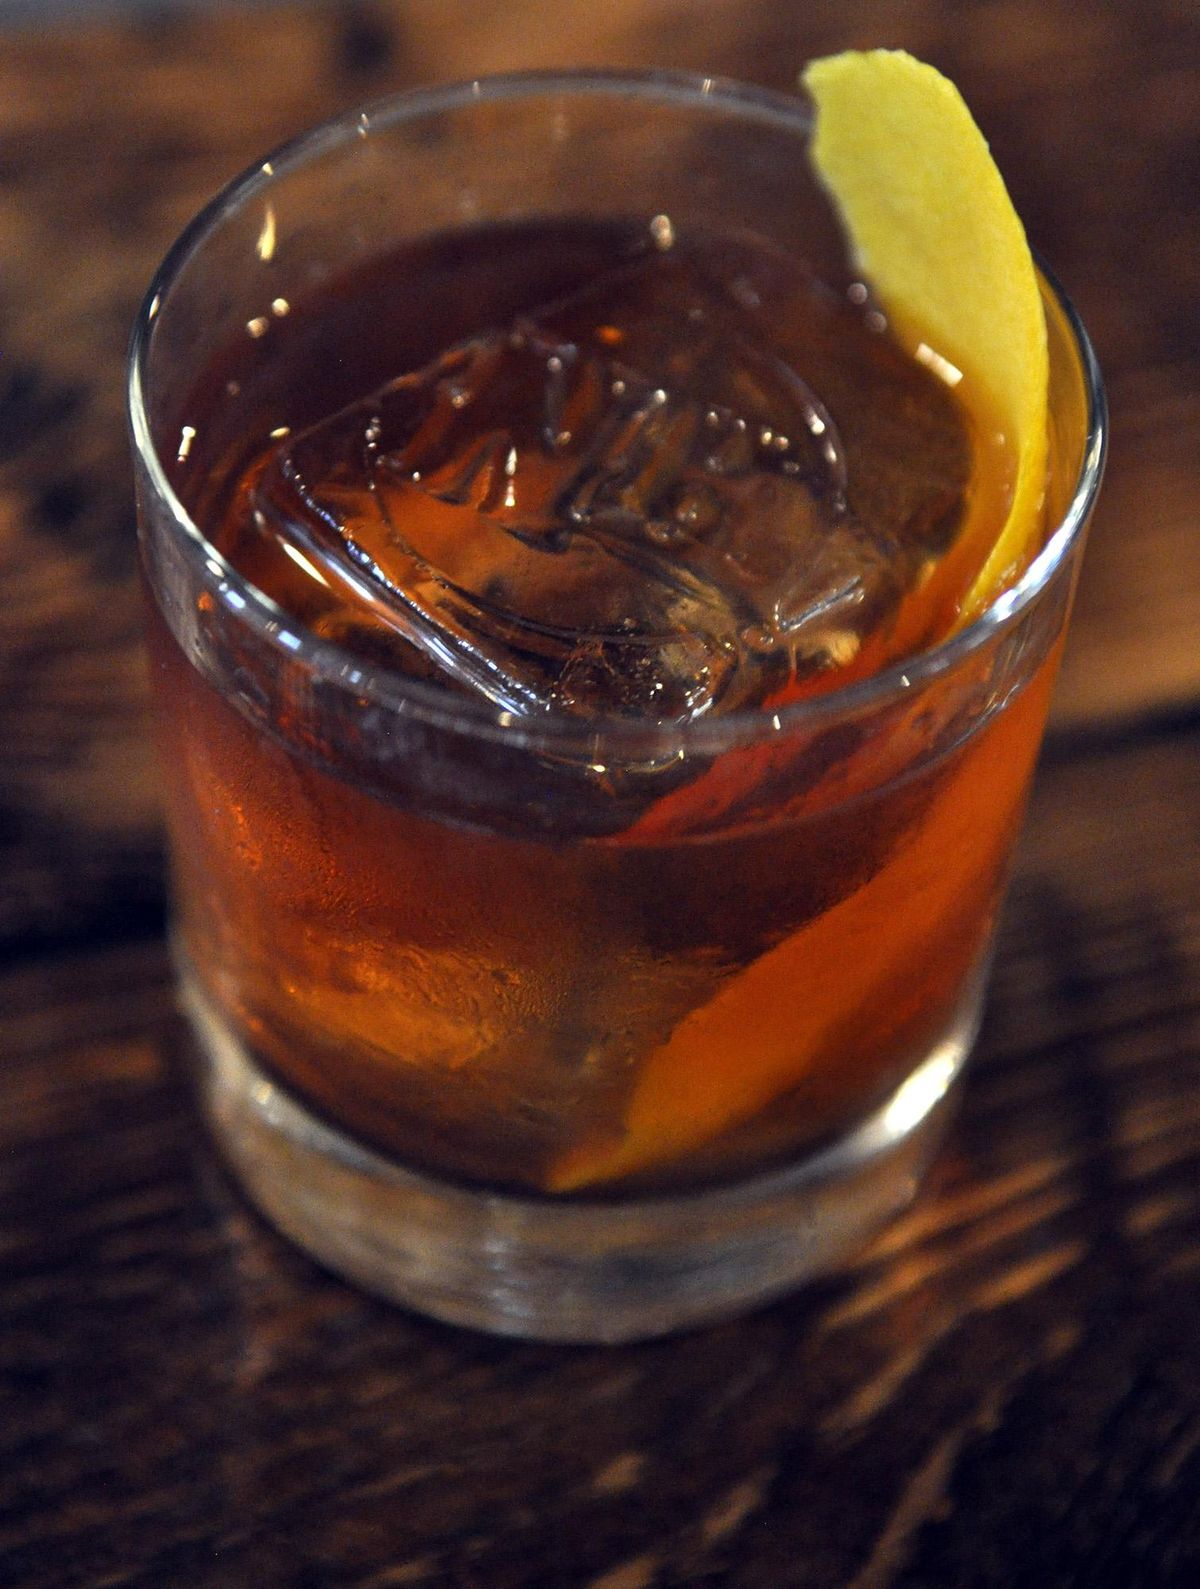 The Cornerstone House Old-Fashioned at the new North Hill on Garland features an ice cube stamped with the establishment’s initials. (Adriana Janovich / The Spokesman-Review)